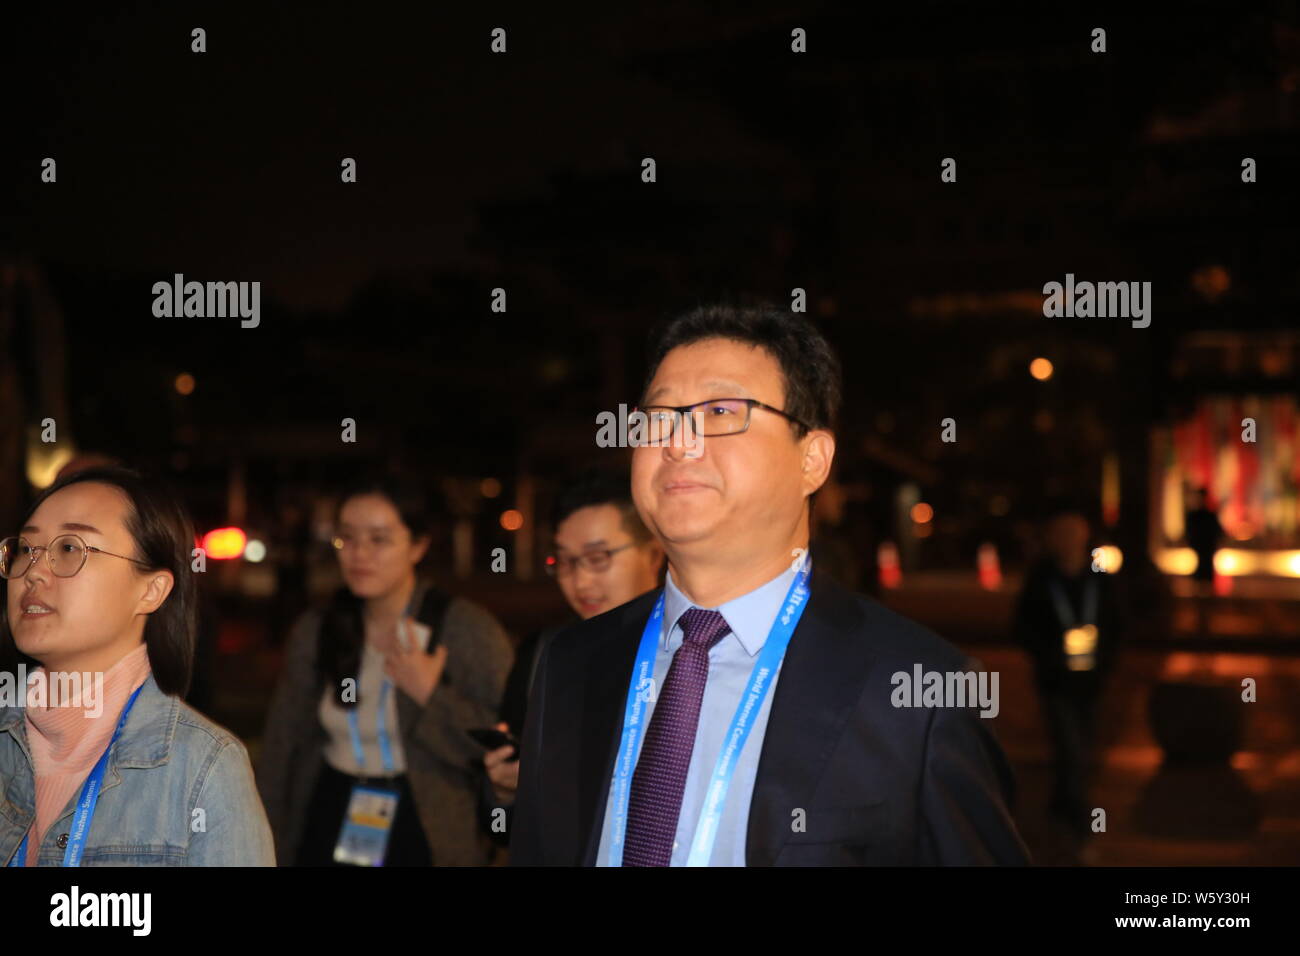 William Ding or Ding Lei, CEO of Netease (163.com), arrives for the 5th World Internet Conference (WIC), also known as Wuzhen Summit, in Wuzhen town, Stock Photo